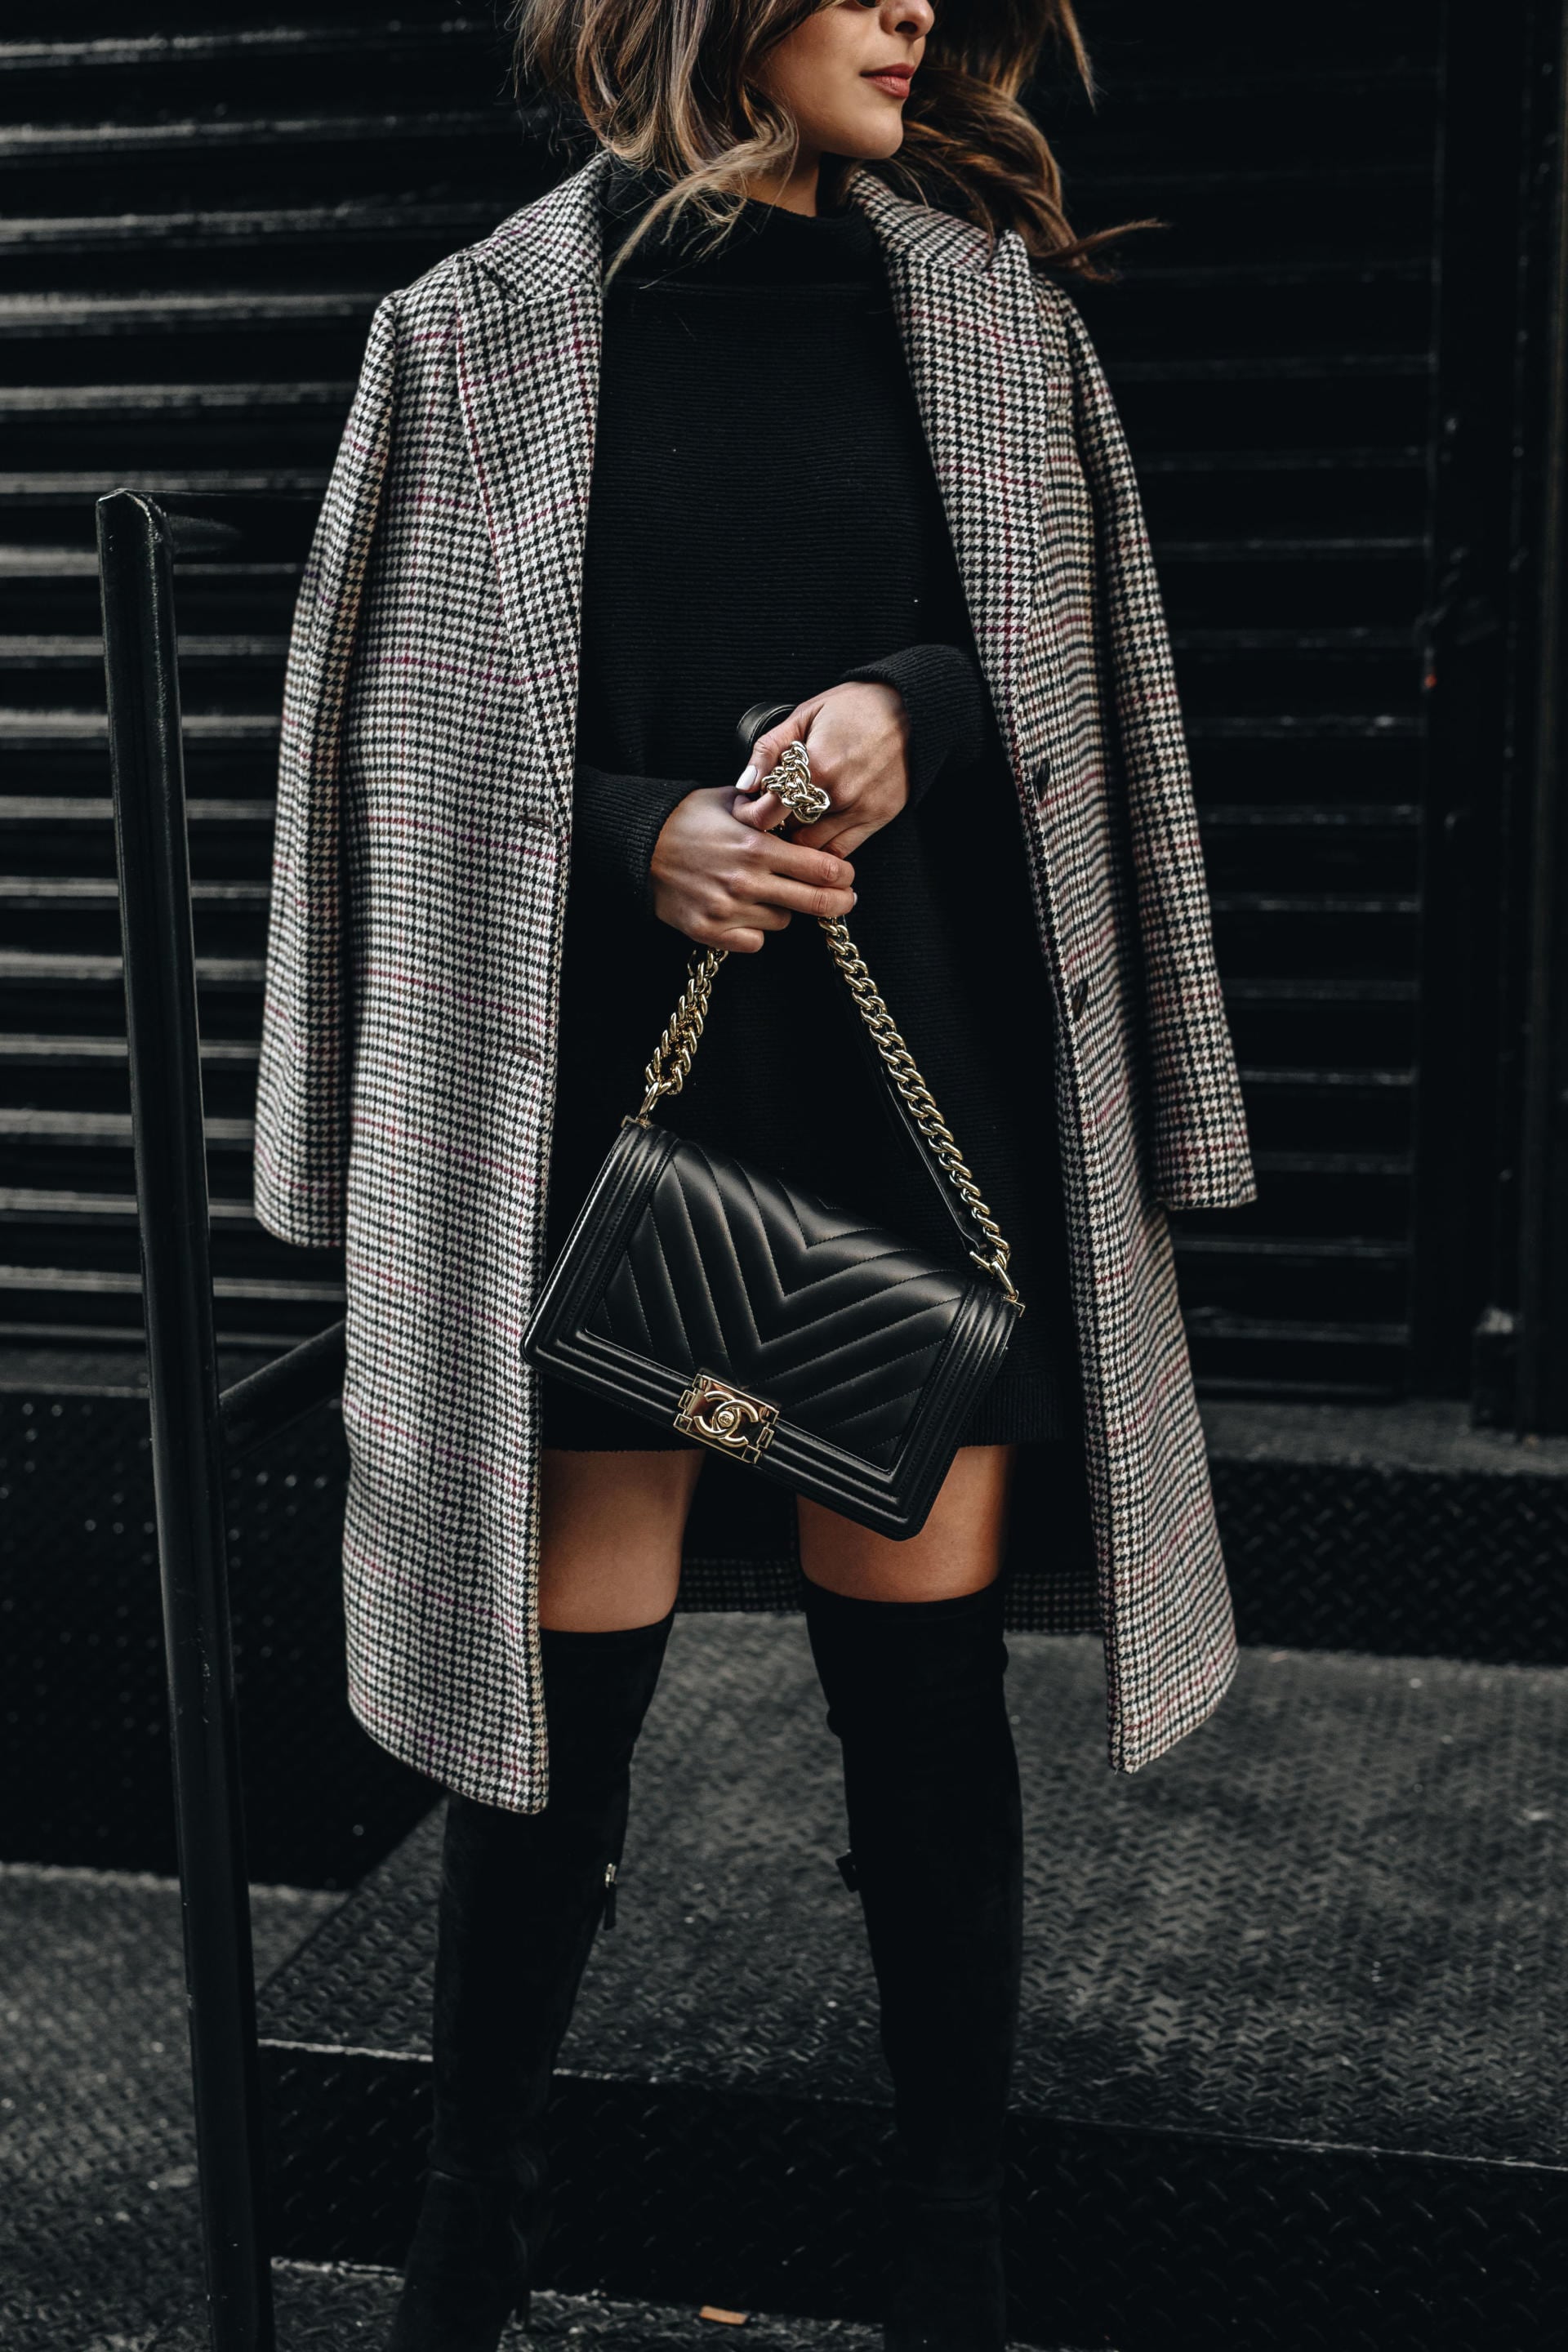 Pam Hetlinger of The Girl From Panama shows how to style over the knee boots in a chic way with a plaid blazer and black sweater dress